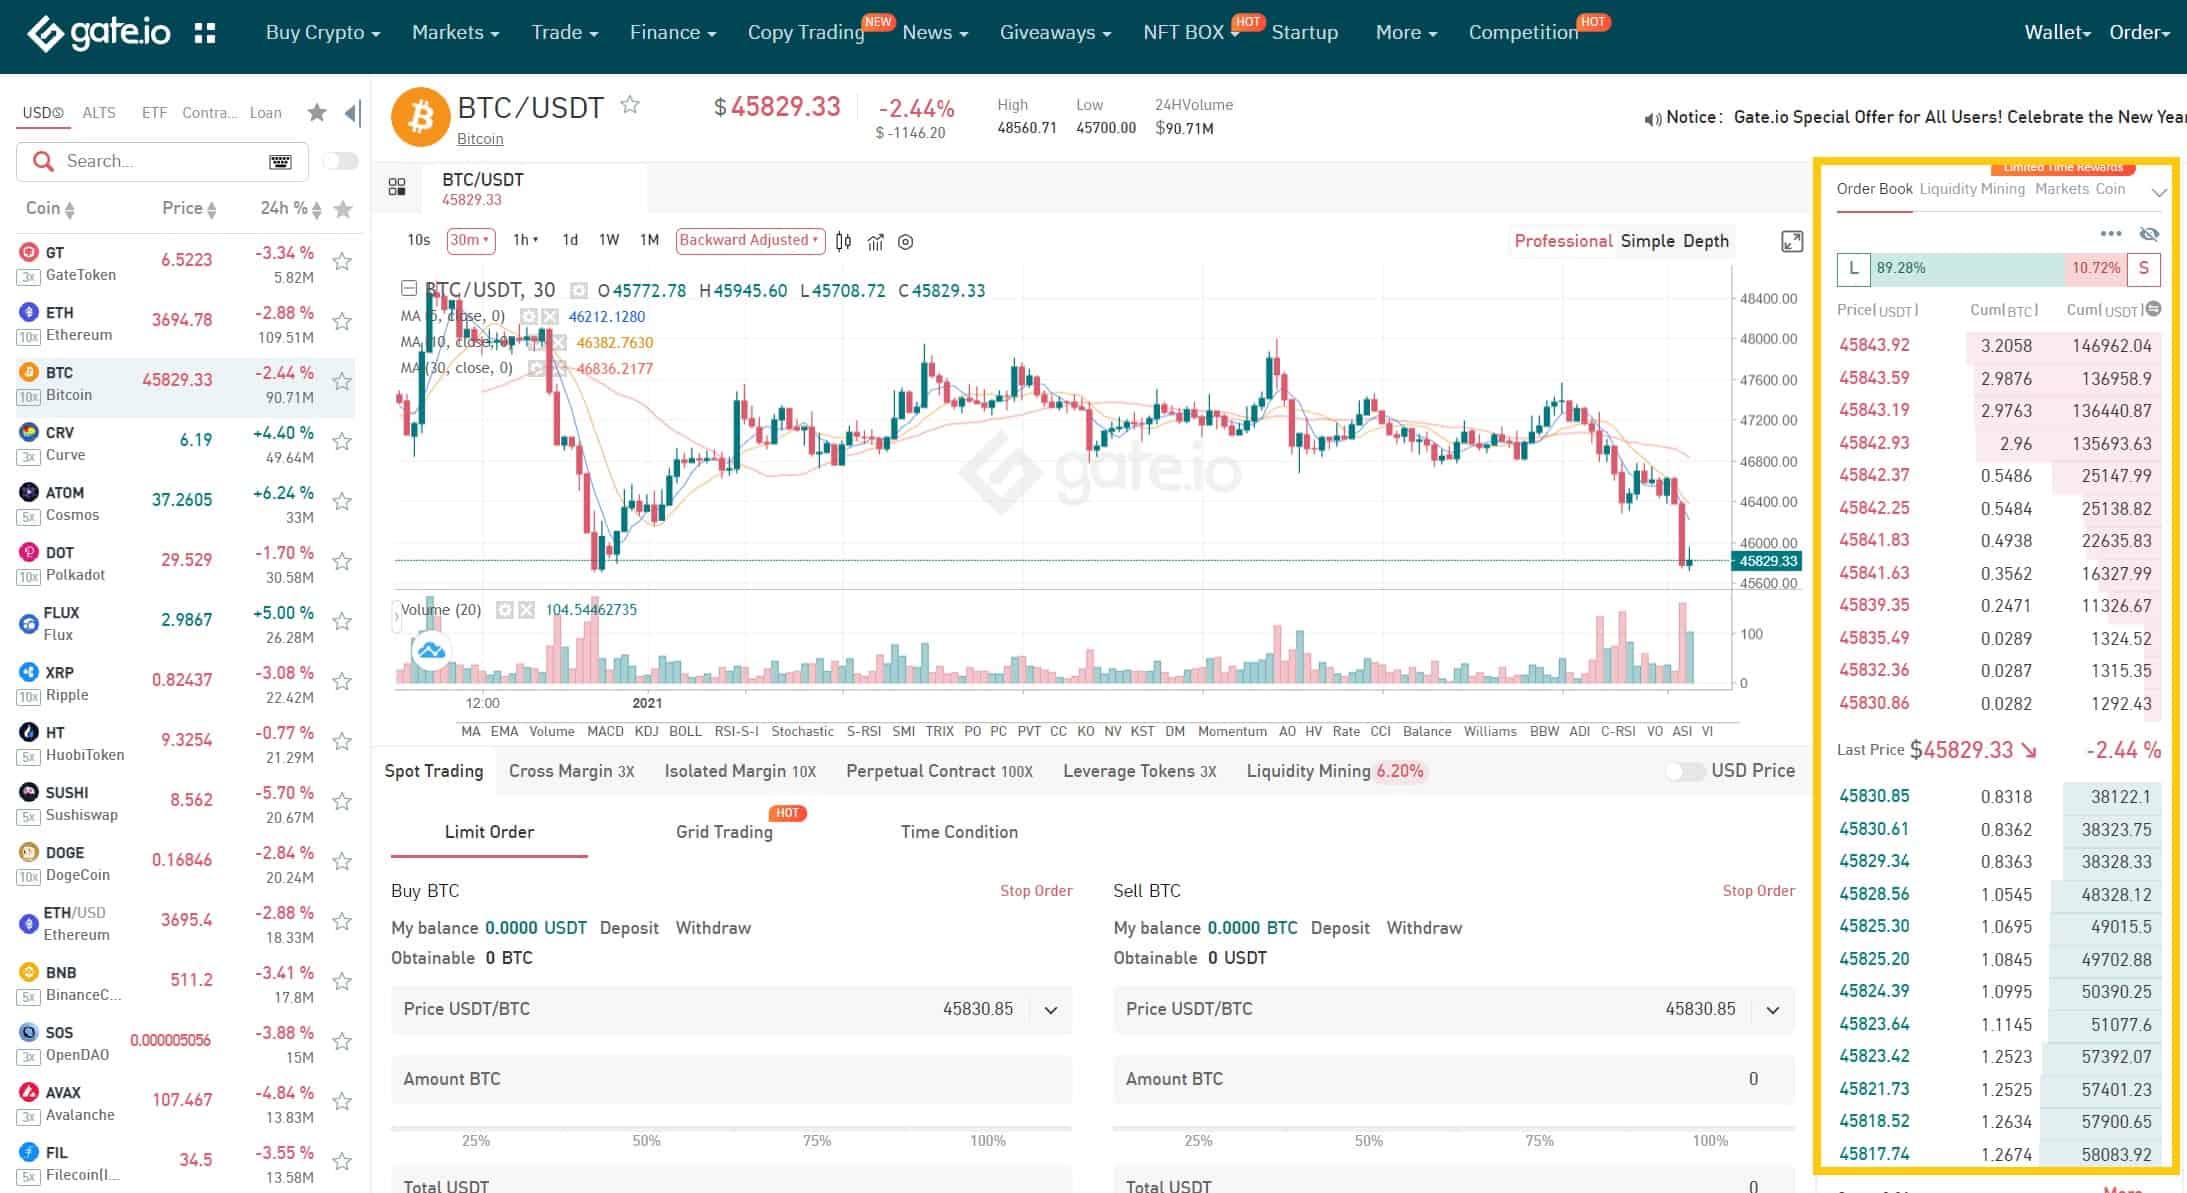 How to Conduct Spot Trading on Gate.io Step 4